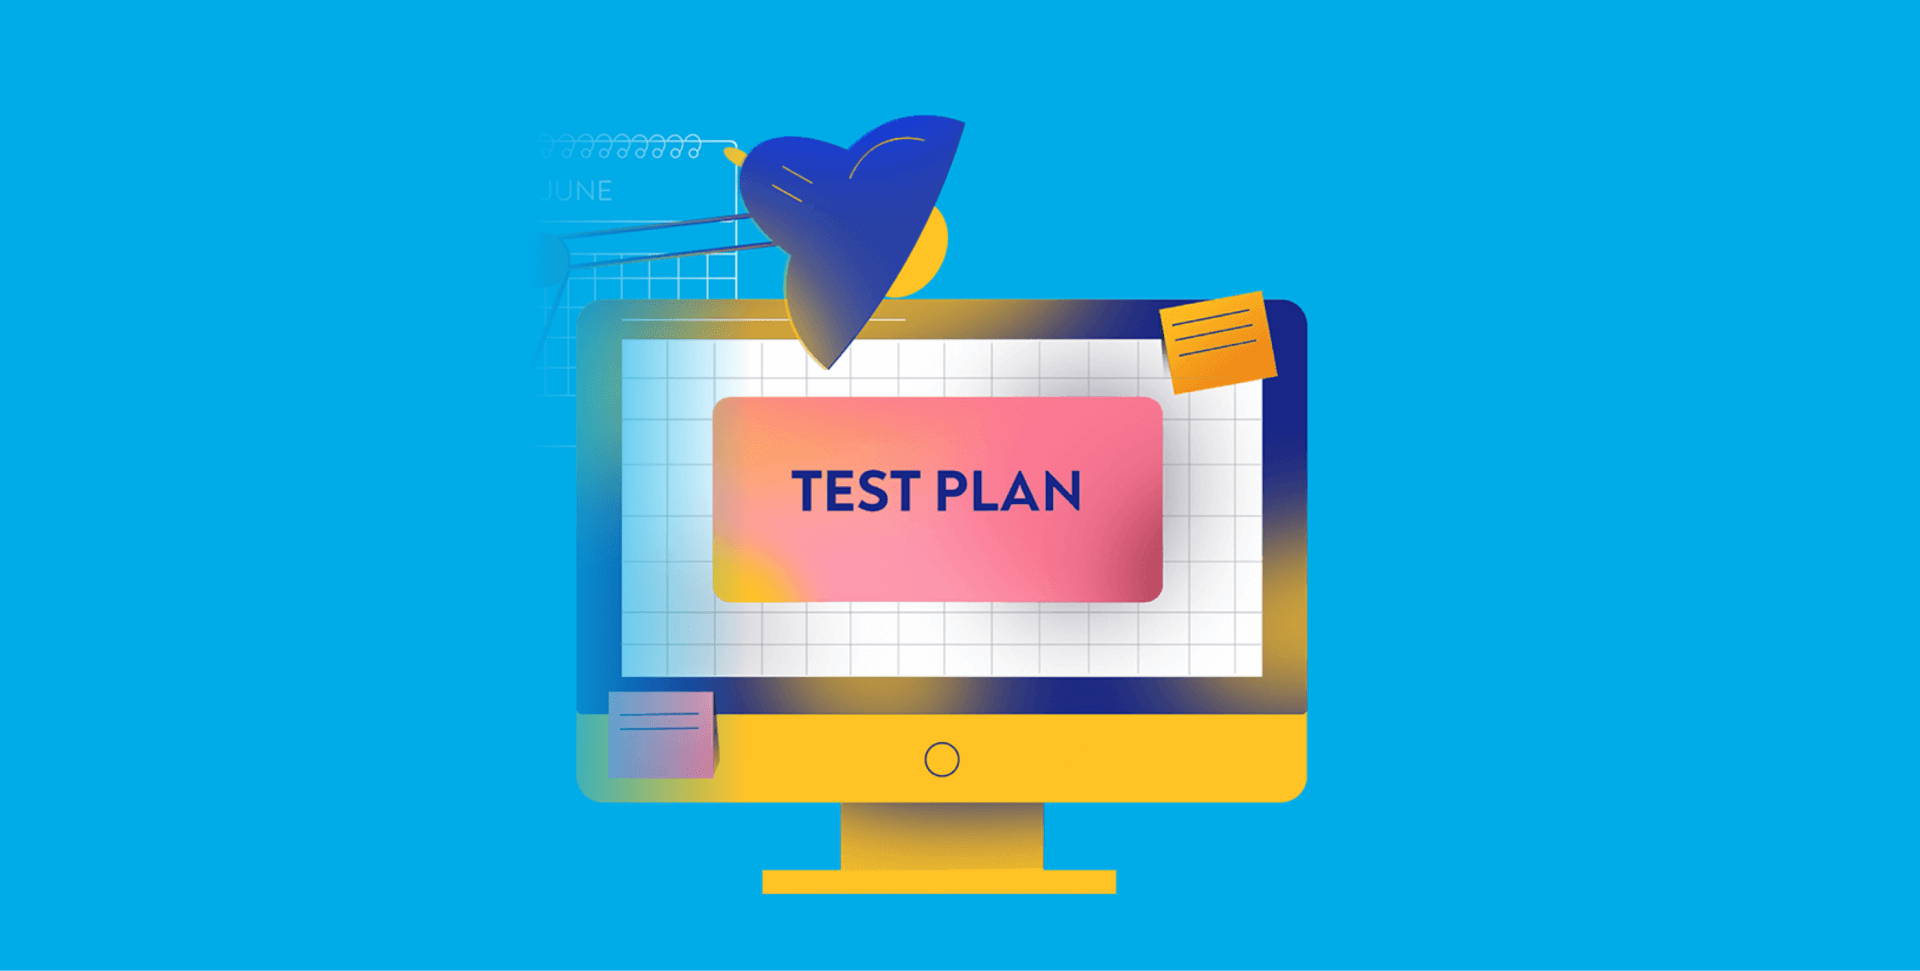 How to create a software test plan?